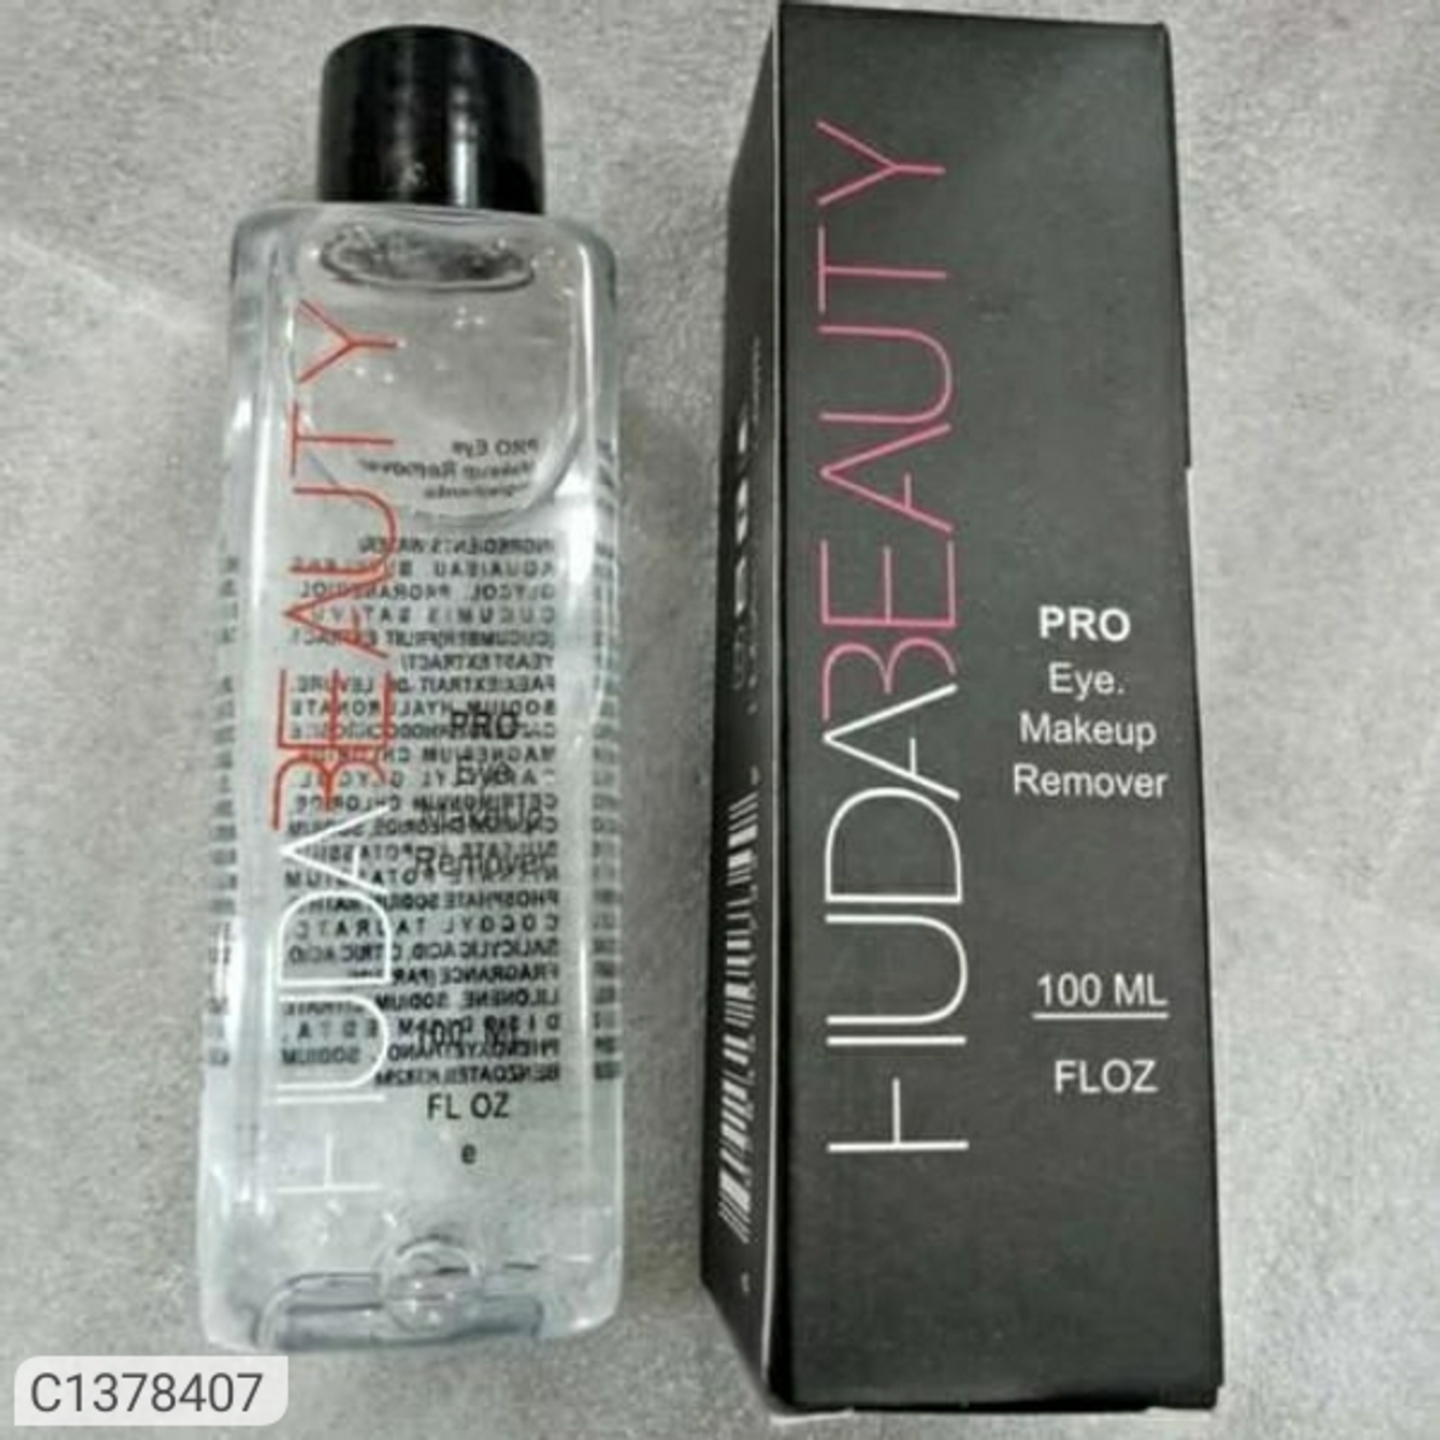 Huda beauty Makeup Remover ( Pack Of 1)